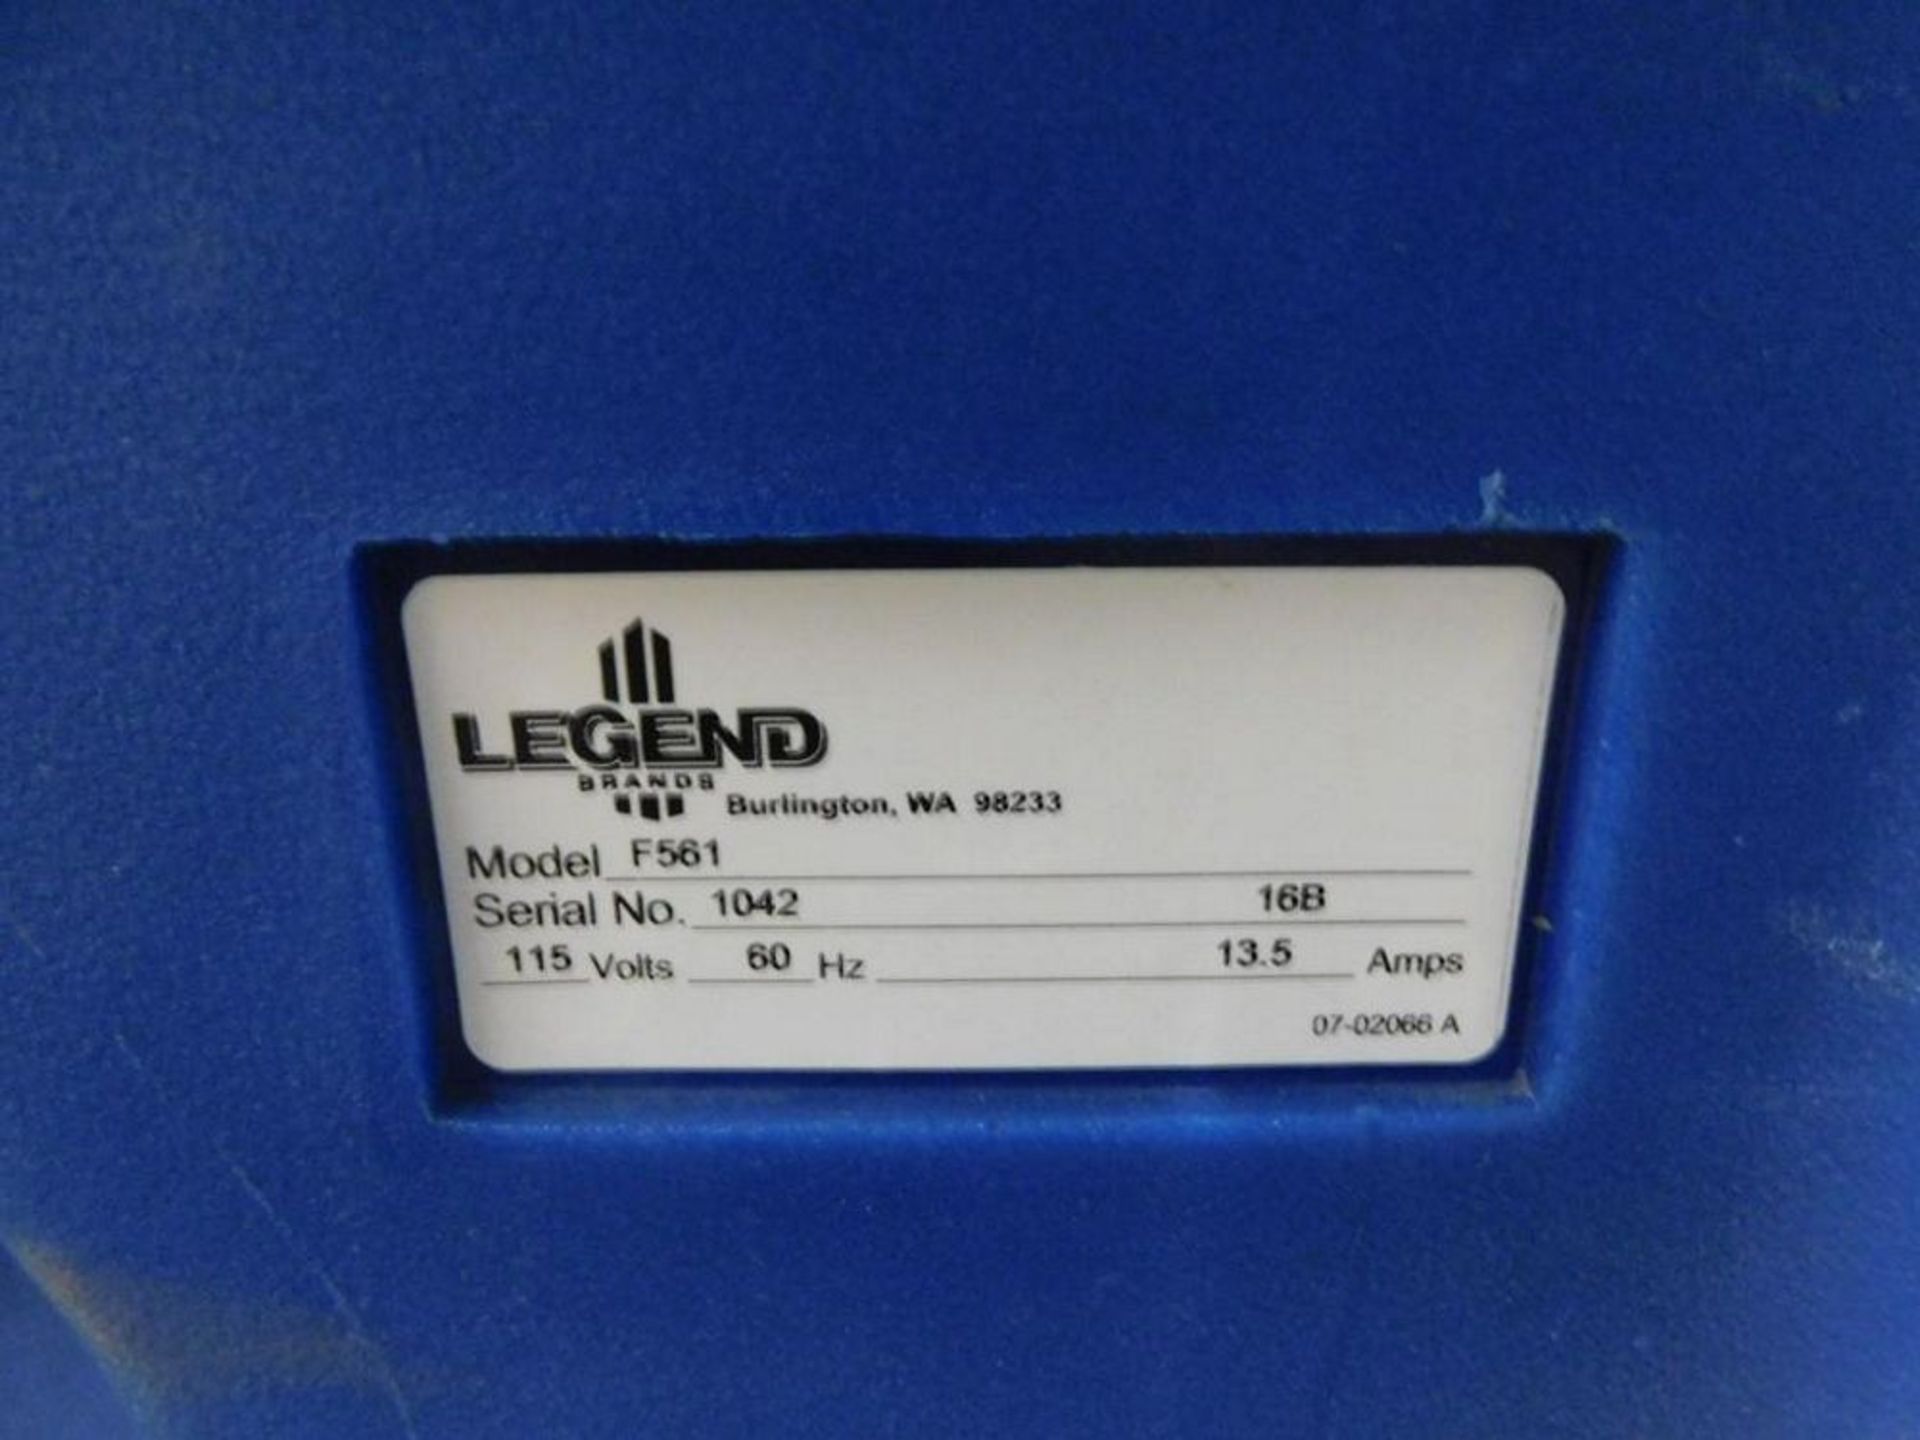 Legend F561 Commercial Carpet Extractor (LOCATION: 318 N. Milwaukee Ave., Wheeling, IL 60090) - Image 8 of 8